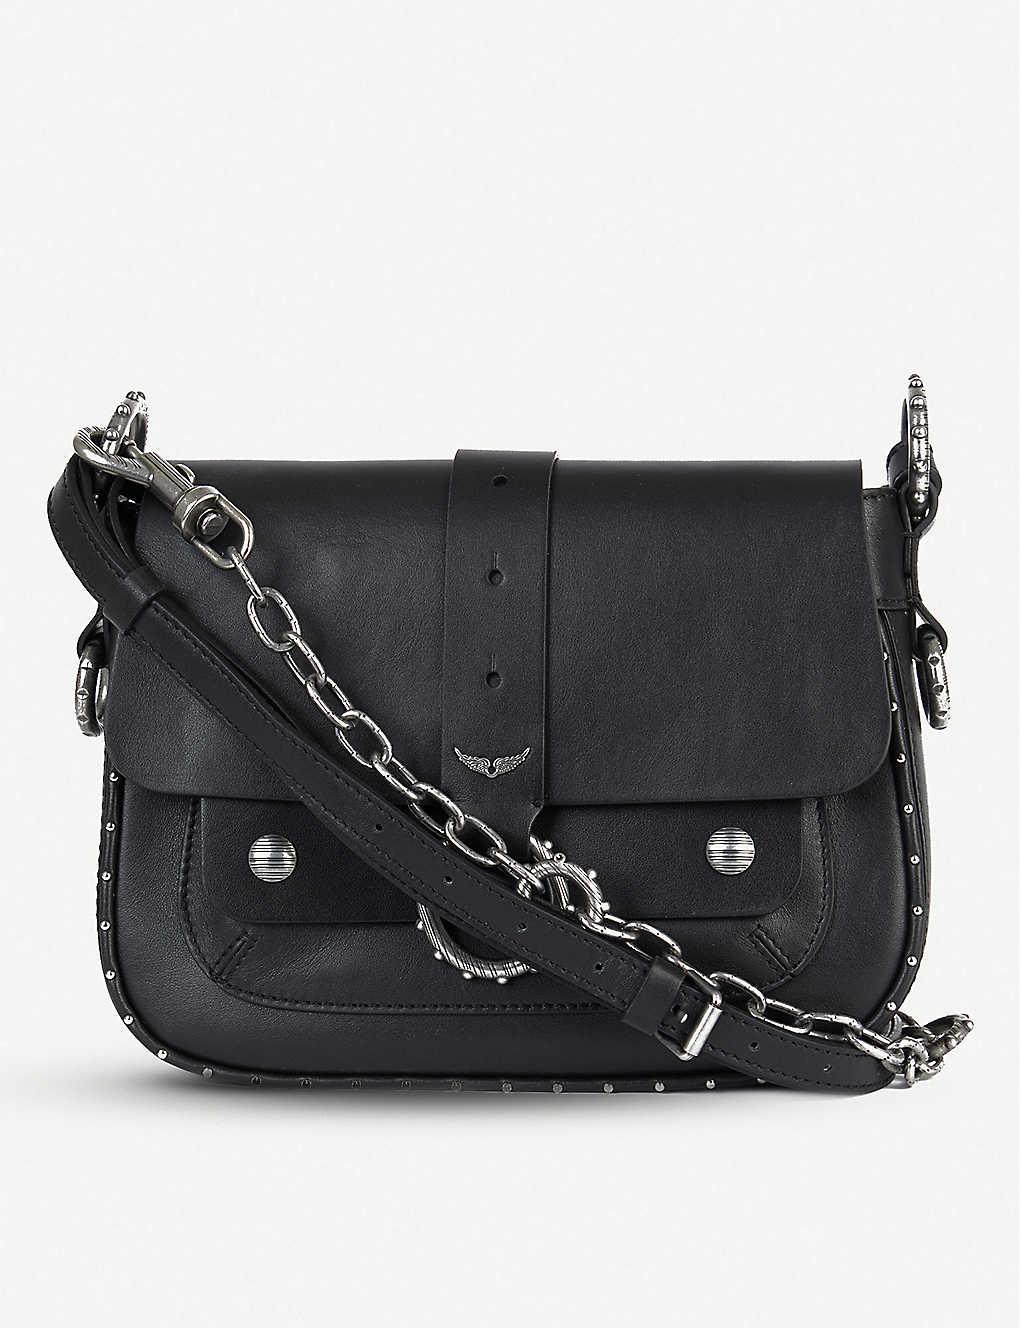 Zadig & Voltaire Kate Studded Leather Cross-body Bag in Black | Lyst